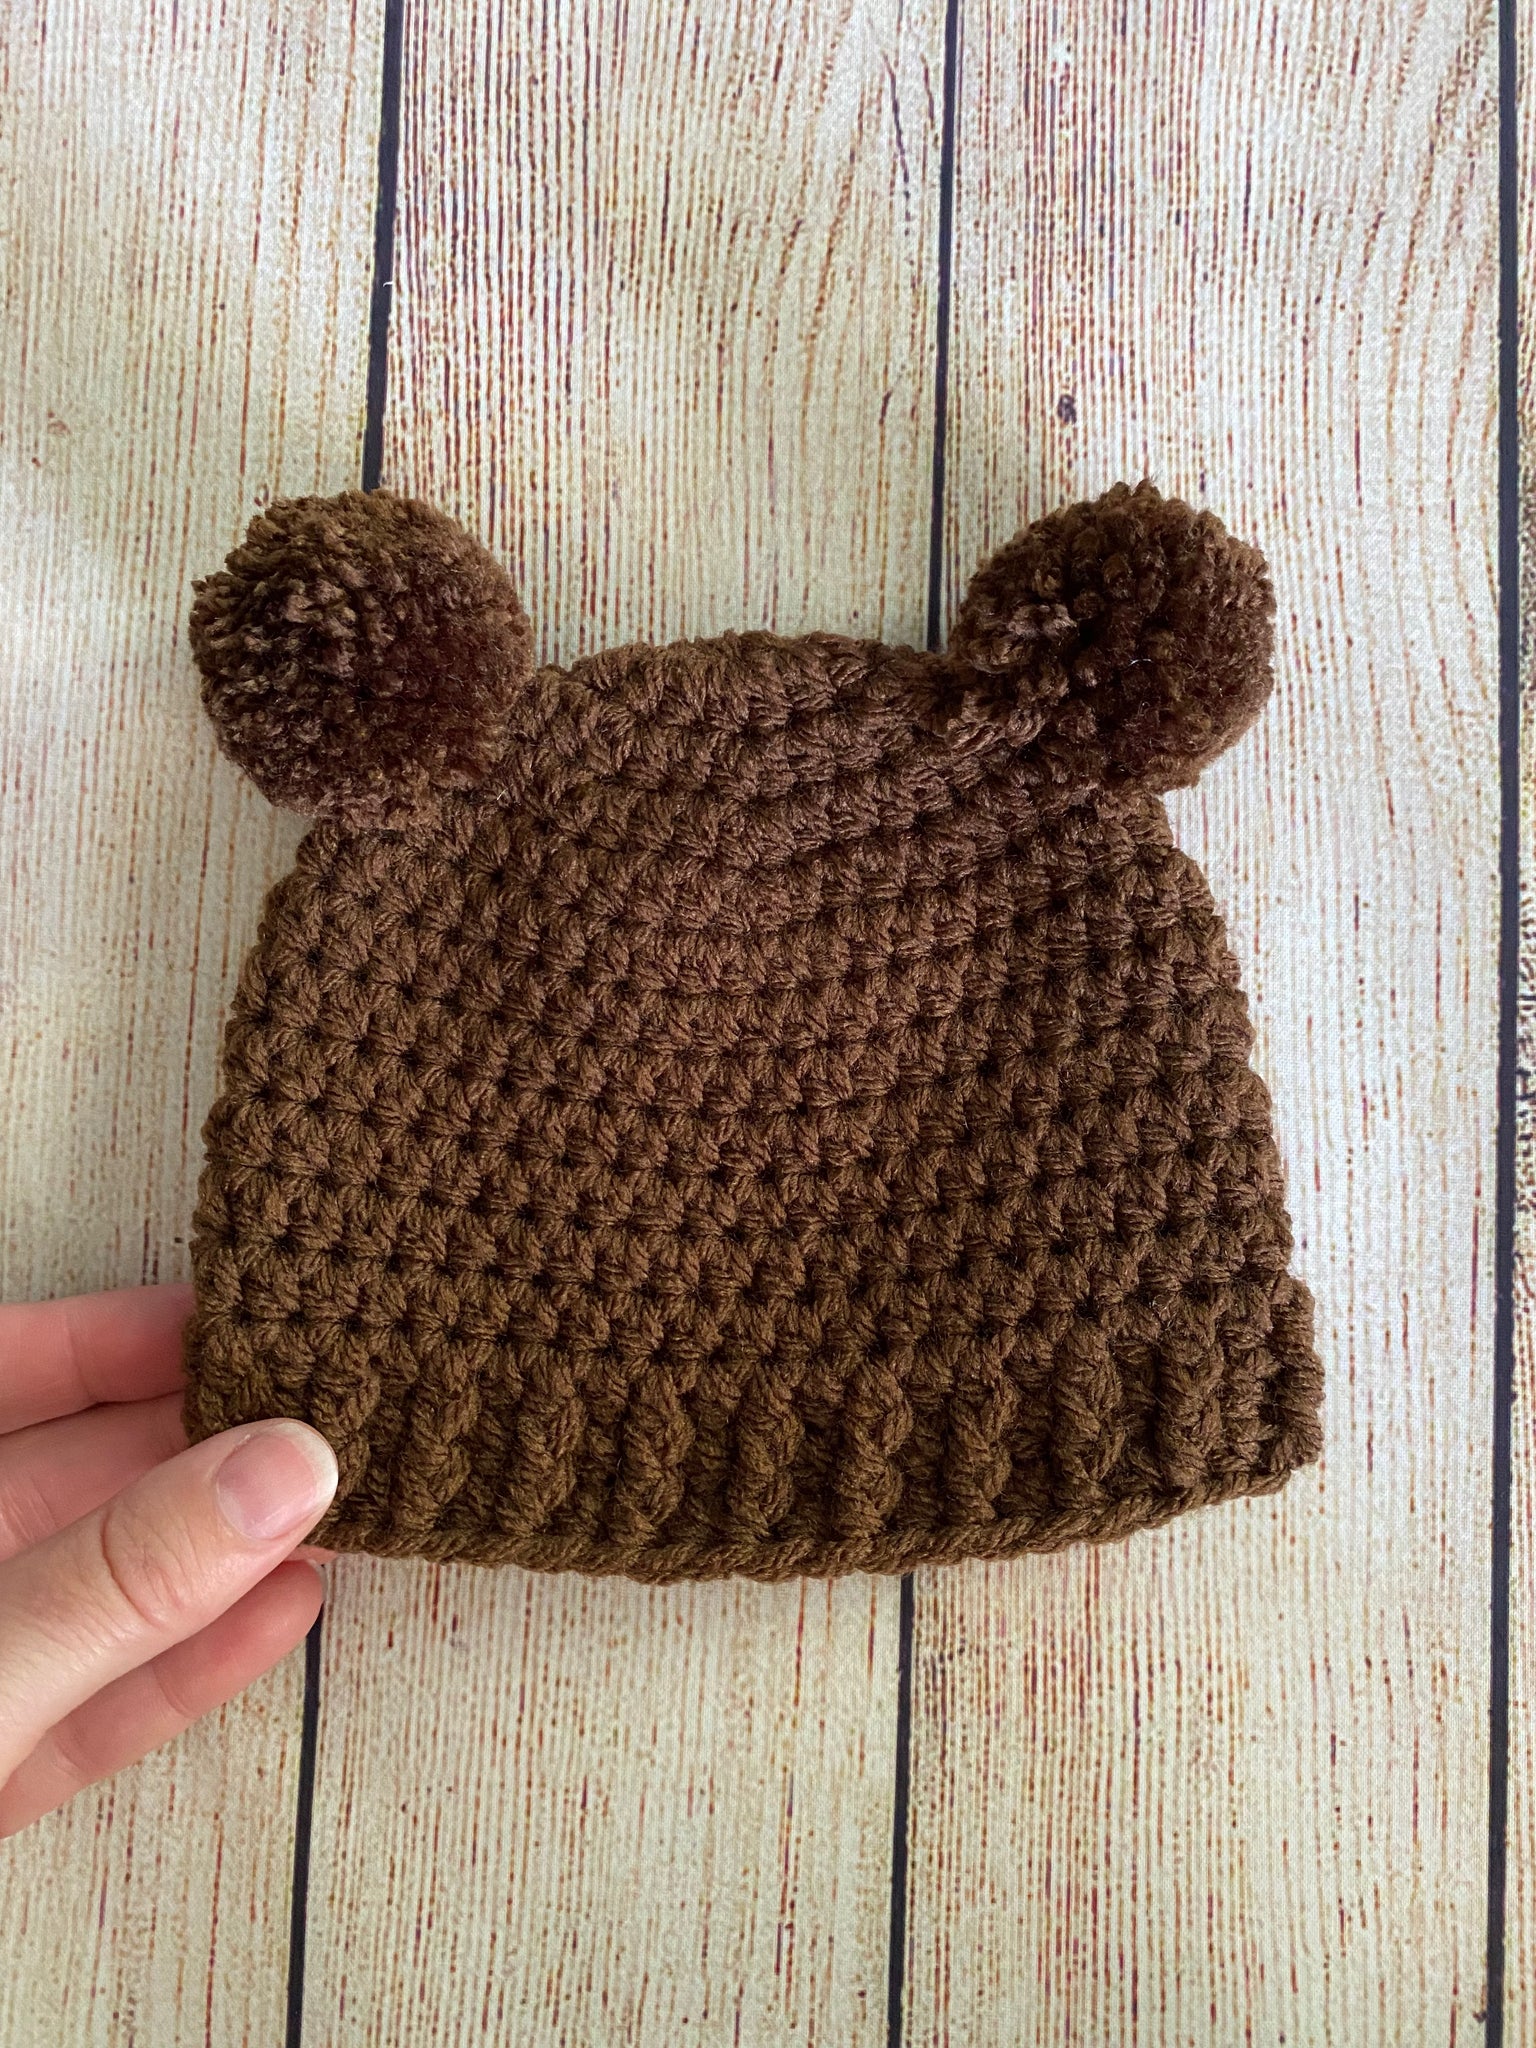 Brown mini pom pom hat by Two Seaside Babes